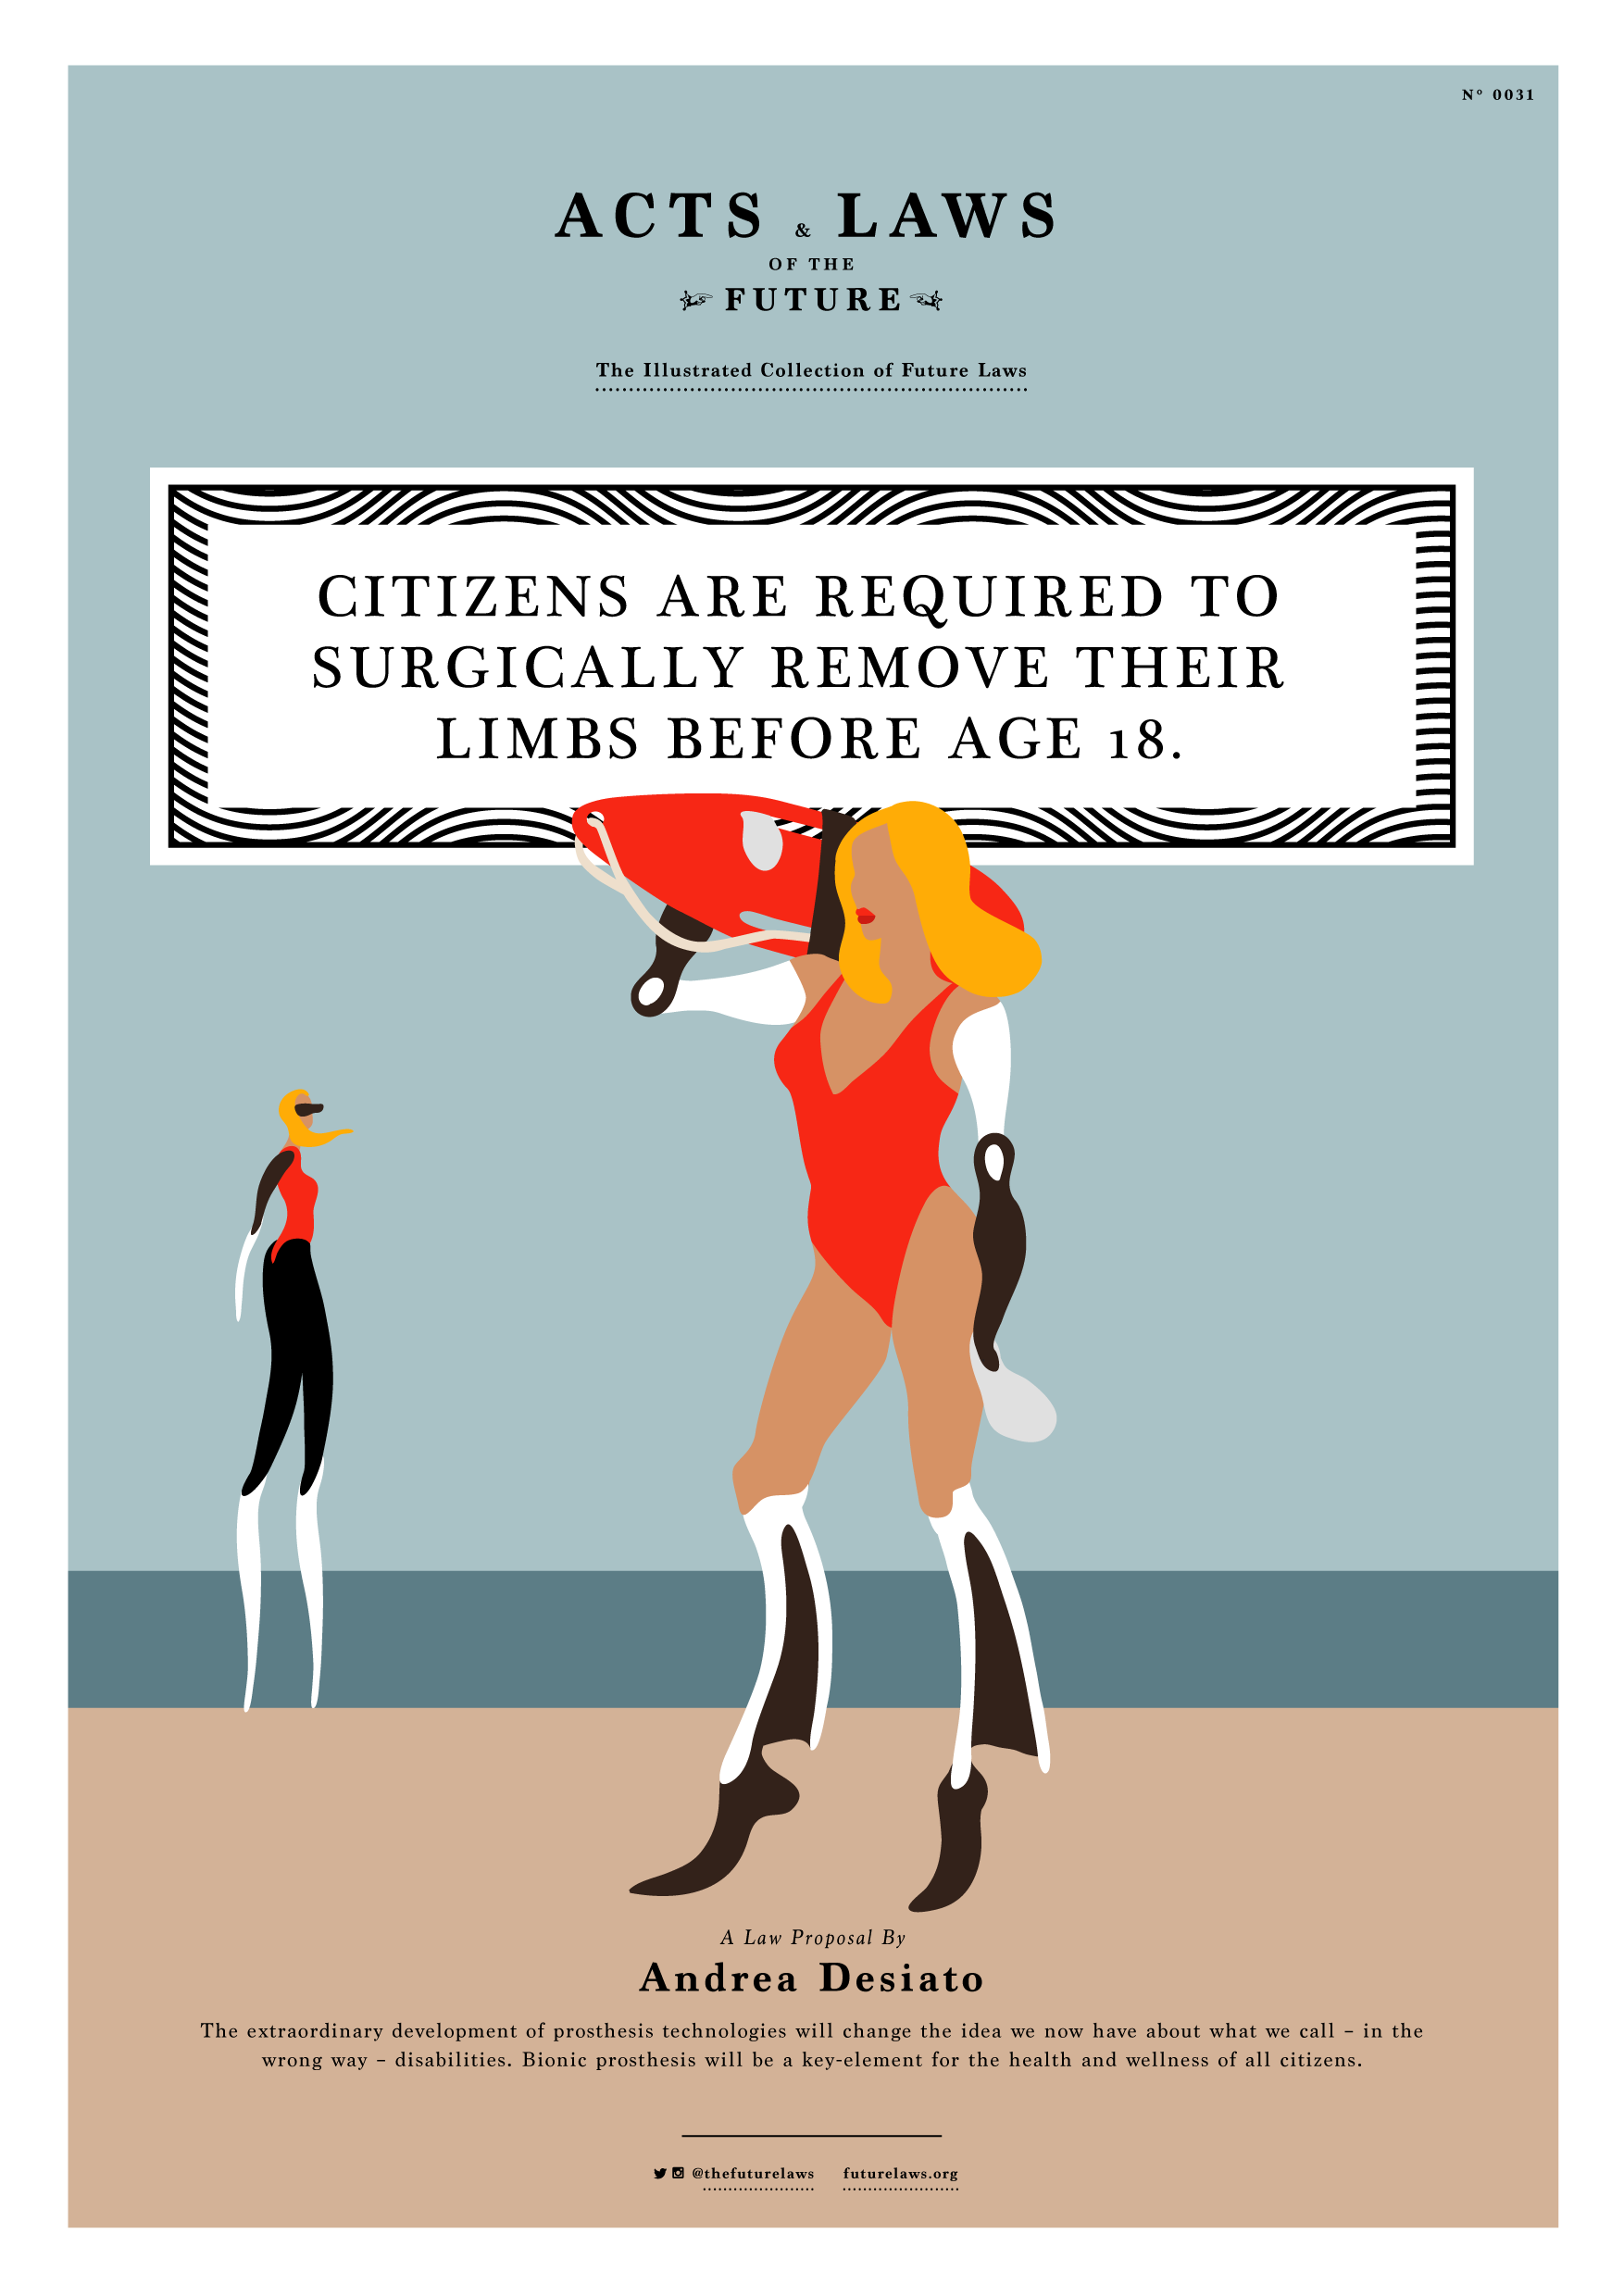 Citizen are required to surgically remove their limbs before age 18.